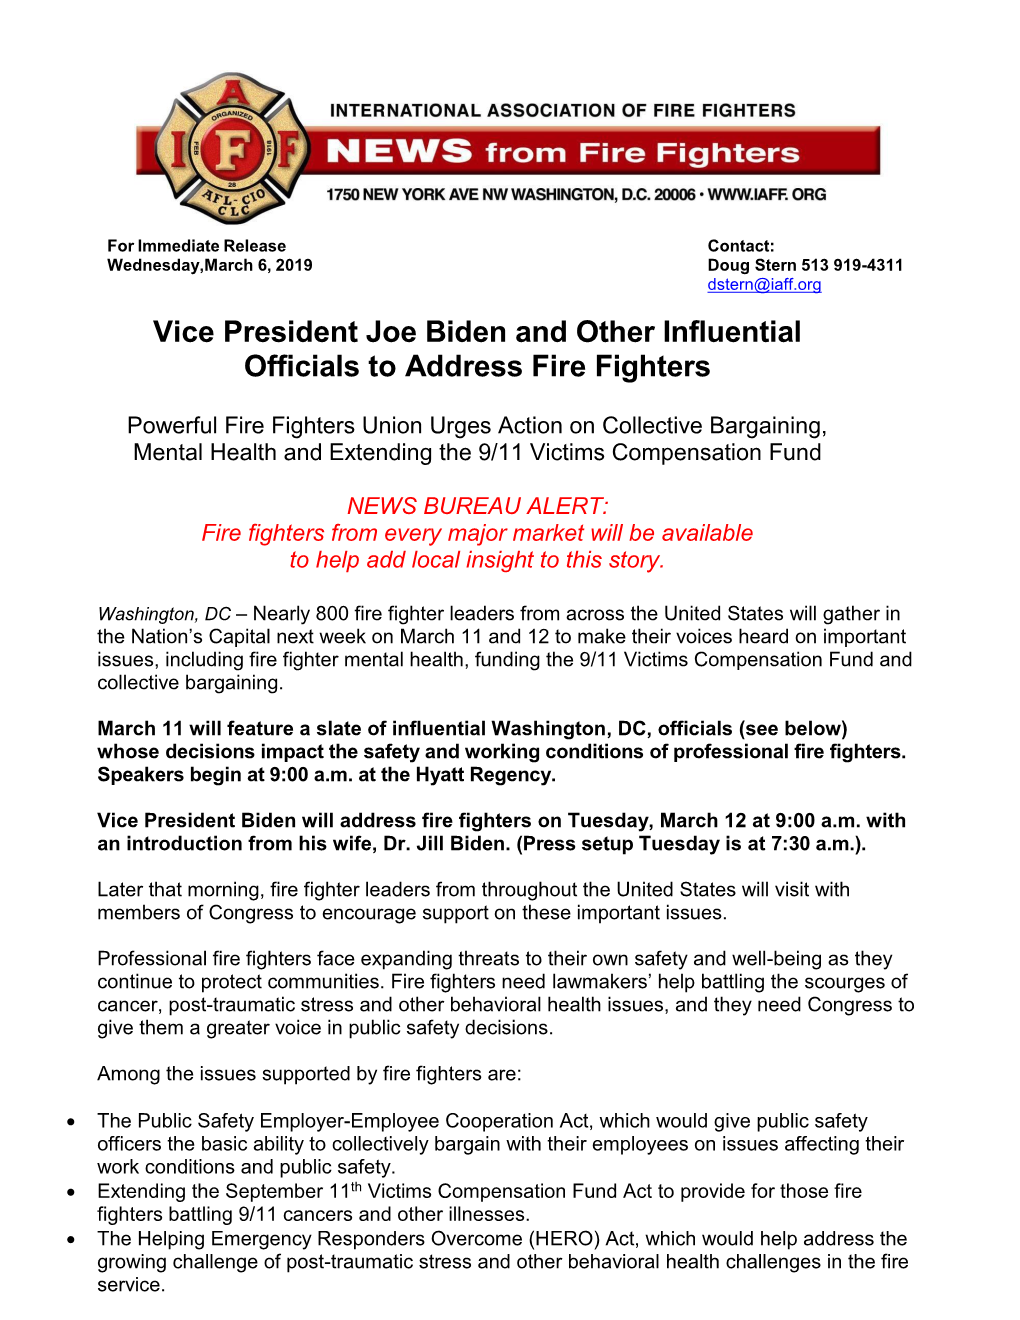 Vice President Joe Biden and Other Influential Officials to Address Fire Fighters